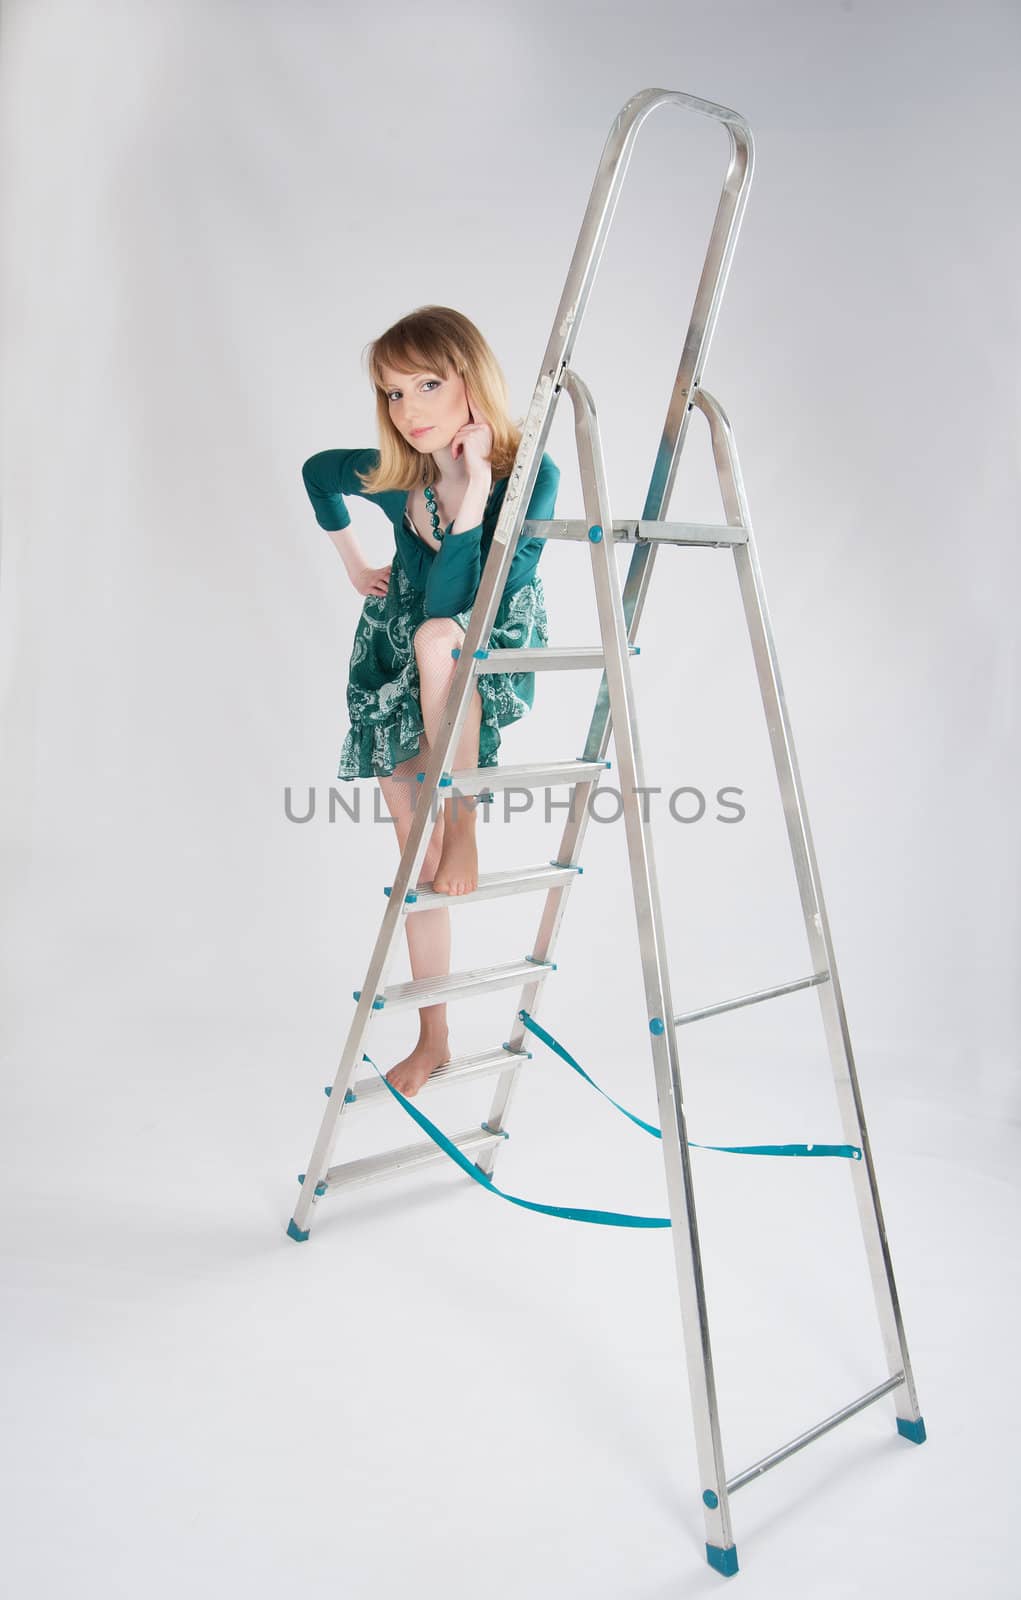 beautiful woman in a green dress standing on a stepladder